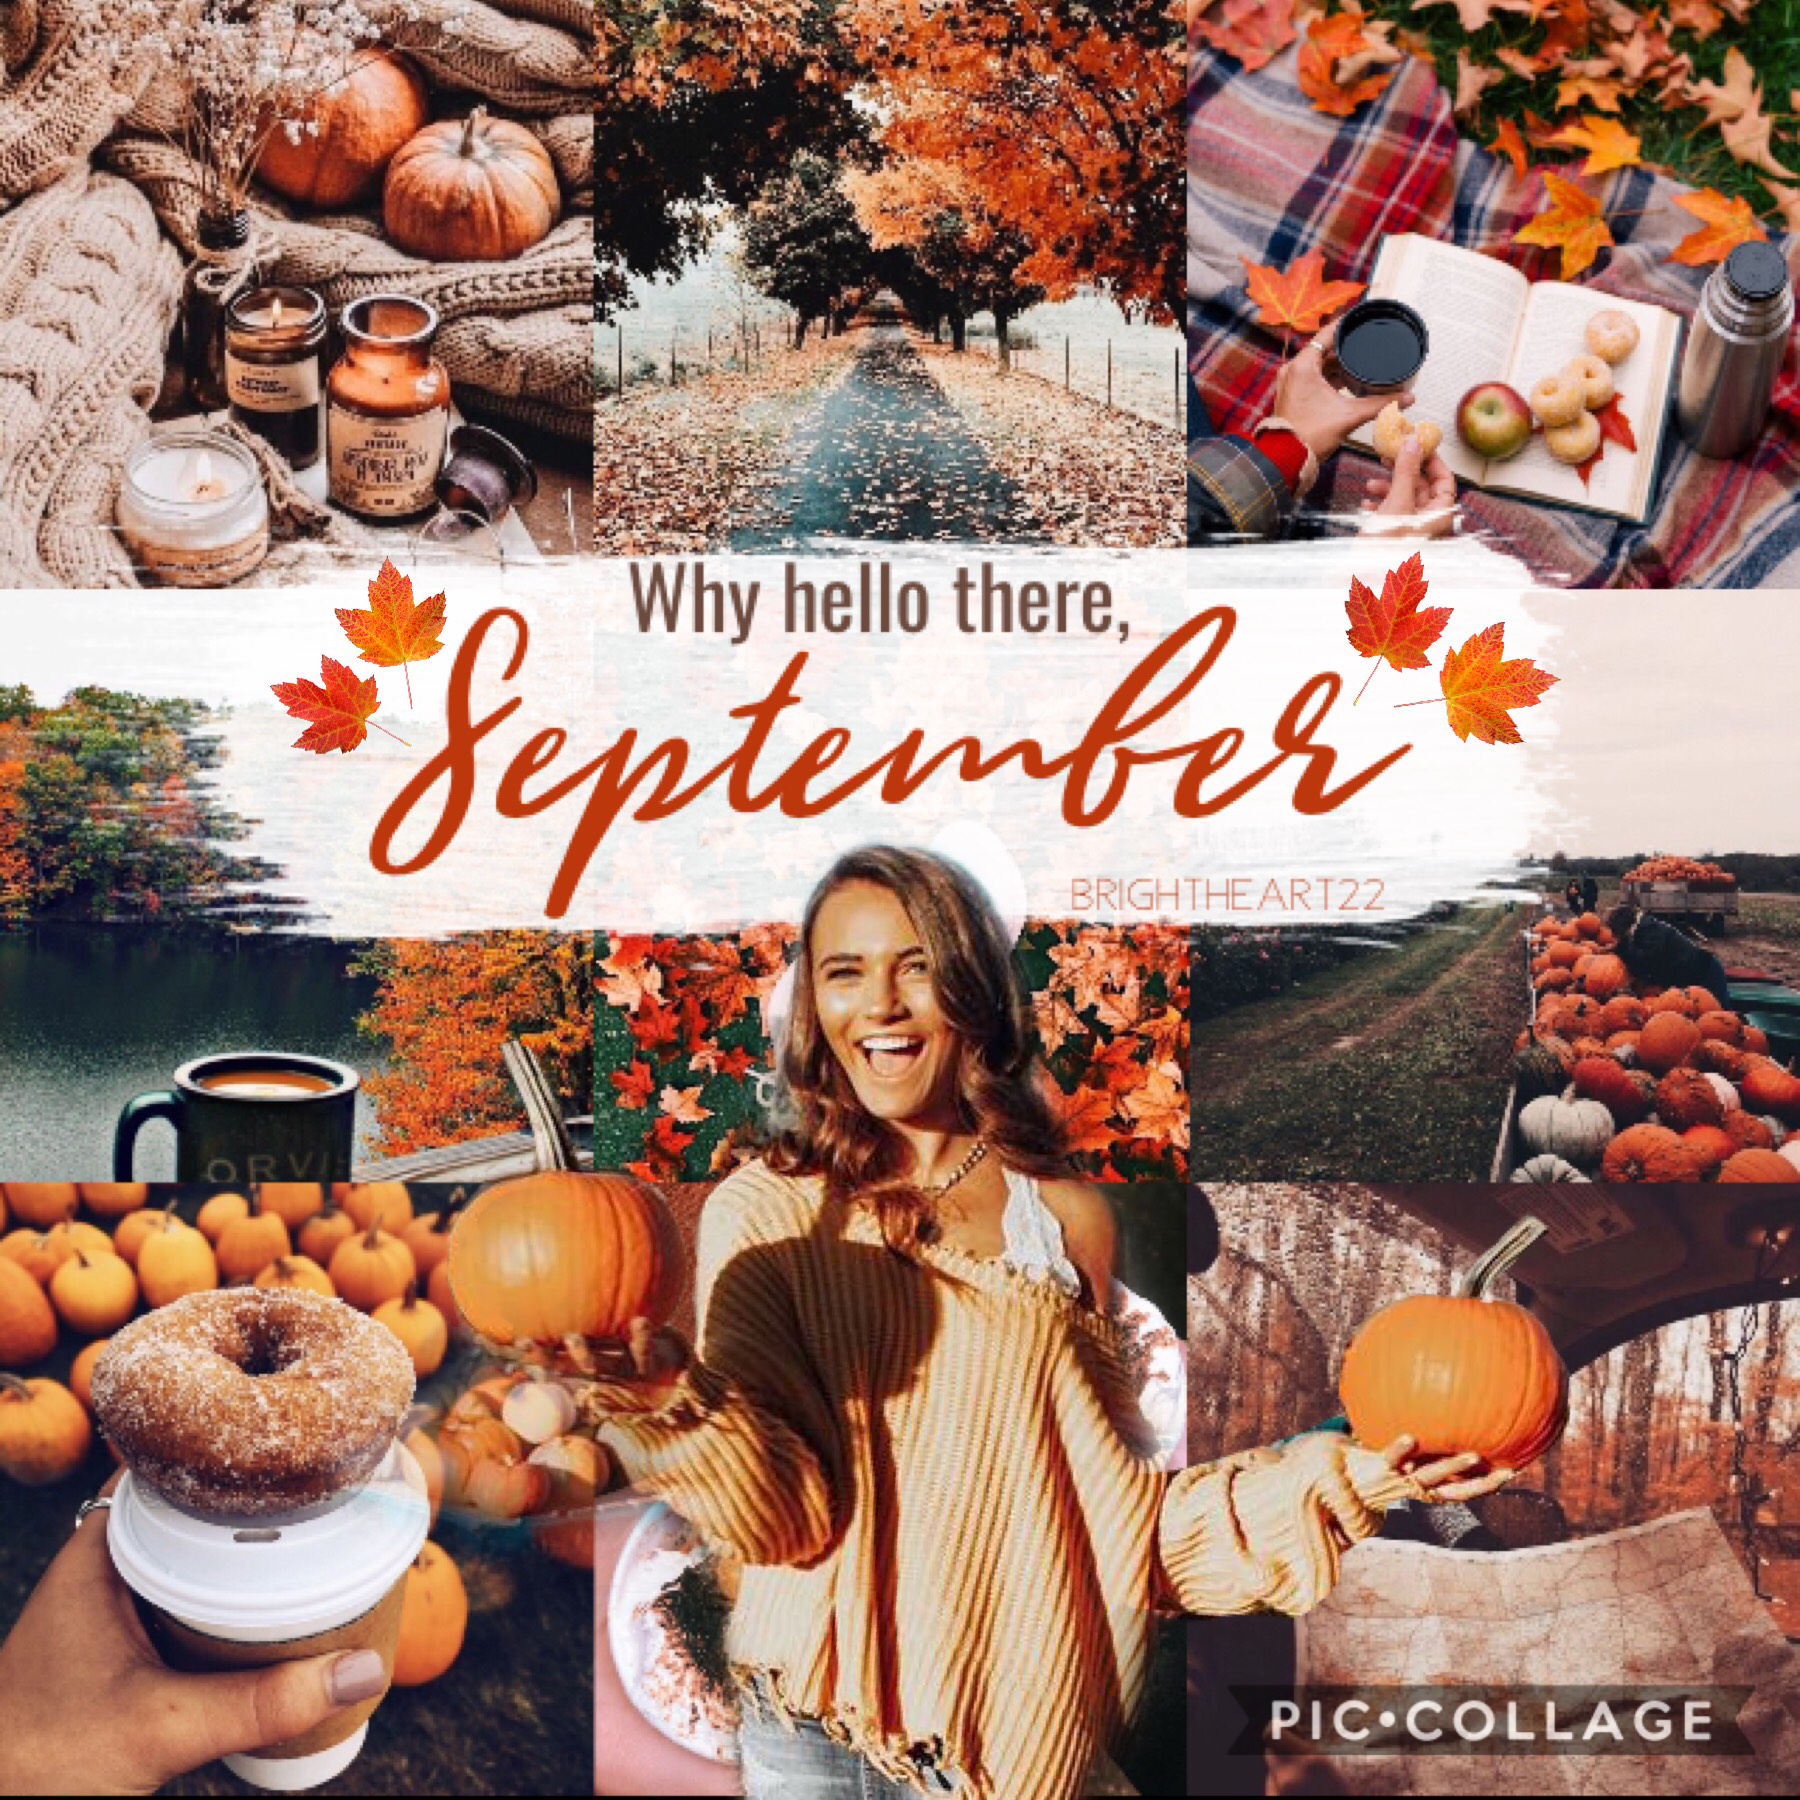 🍁TAP🍁
Hey guys!
Sorry I’ve been gone
School started and I got busy 
BUT
I’m back! As most of you know, Fall is my favorite season, and it’s finally here!  
I’m so happy.
Have a great day!
-Brightheart22 